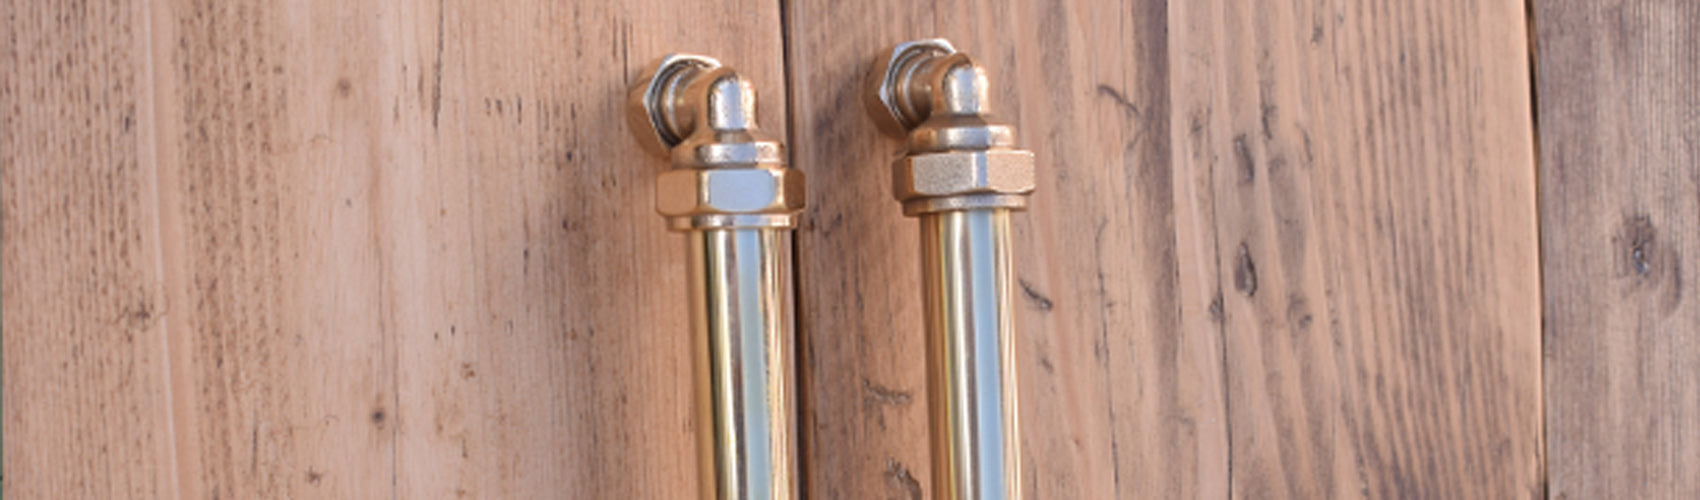 brass handles with an industrial style yet perfect for a modern home